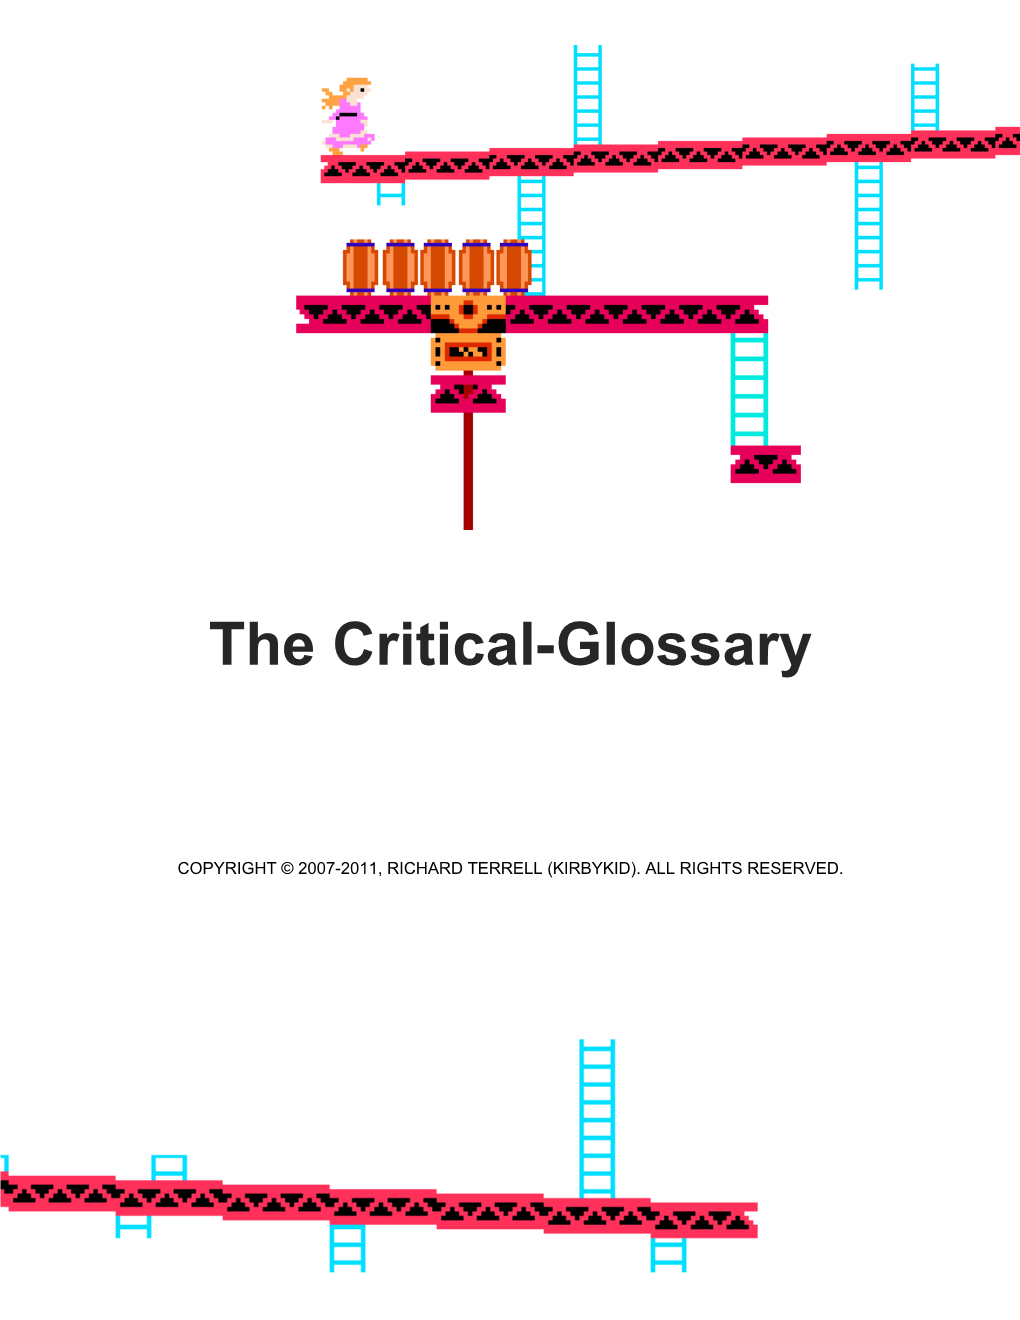 The Critical-Glossary